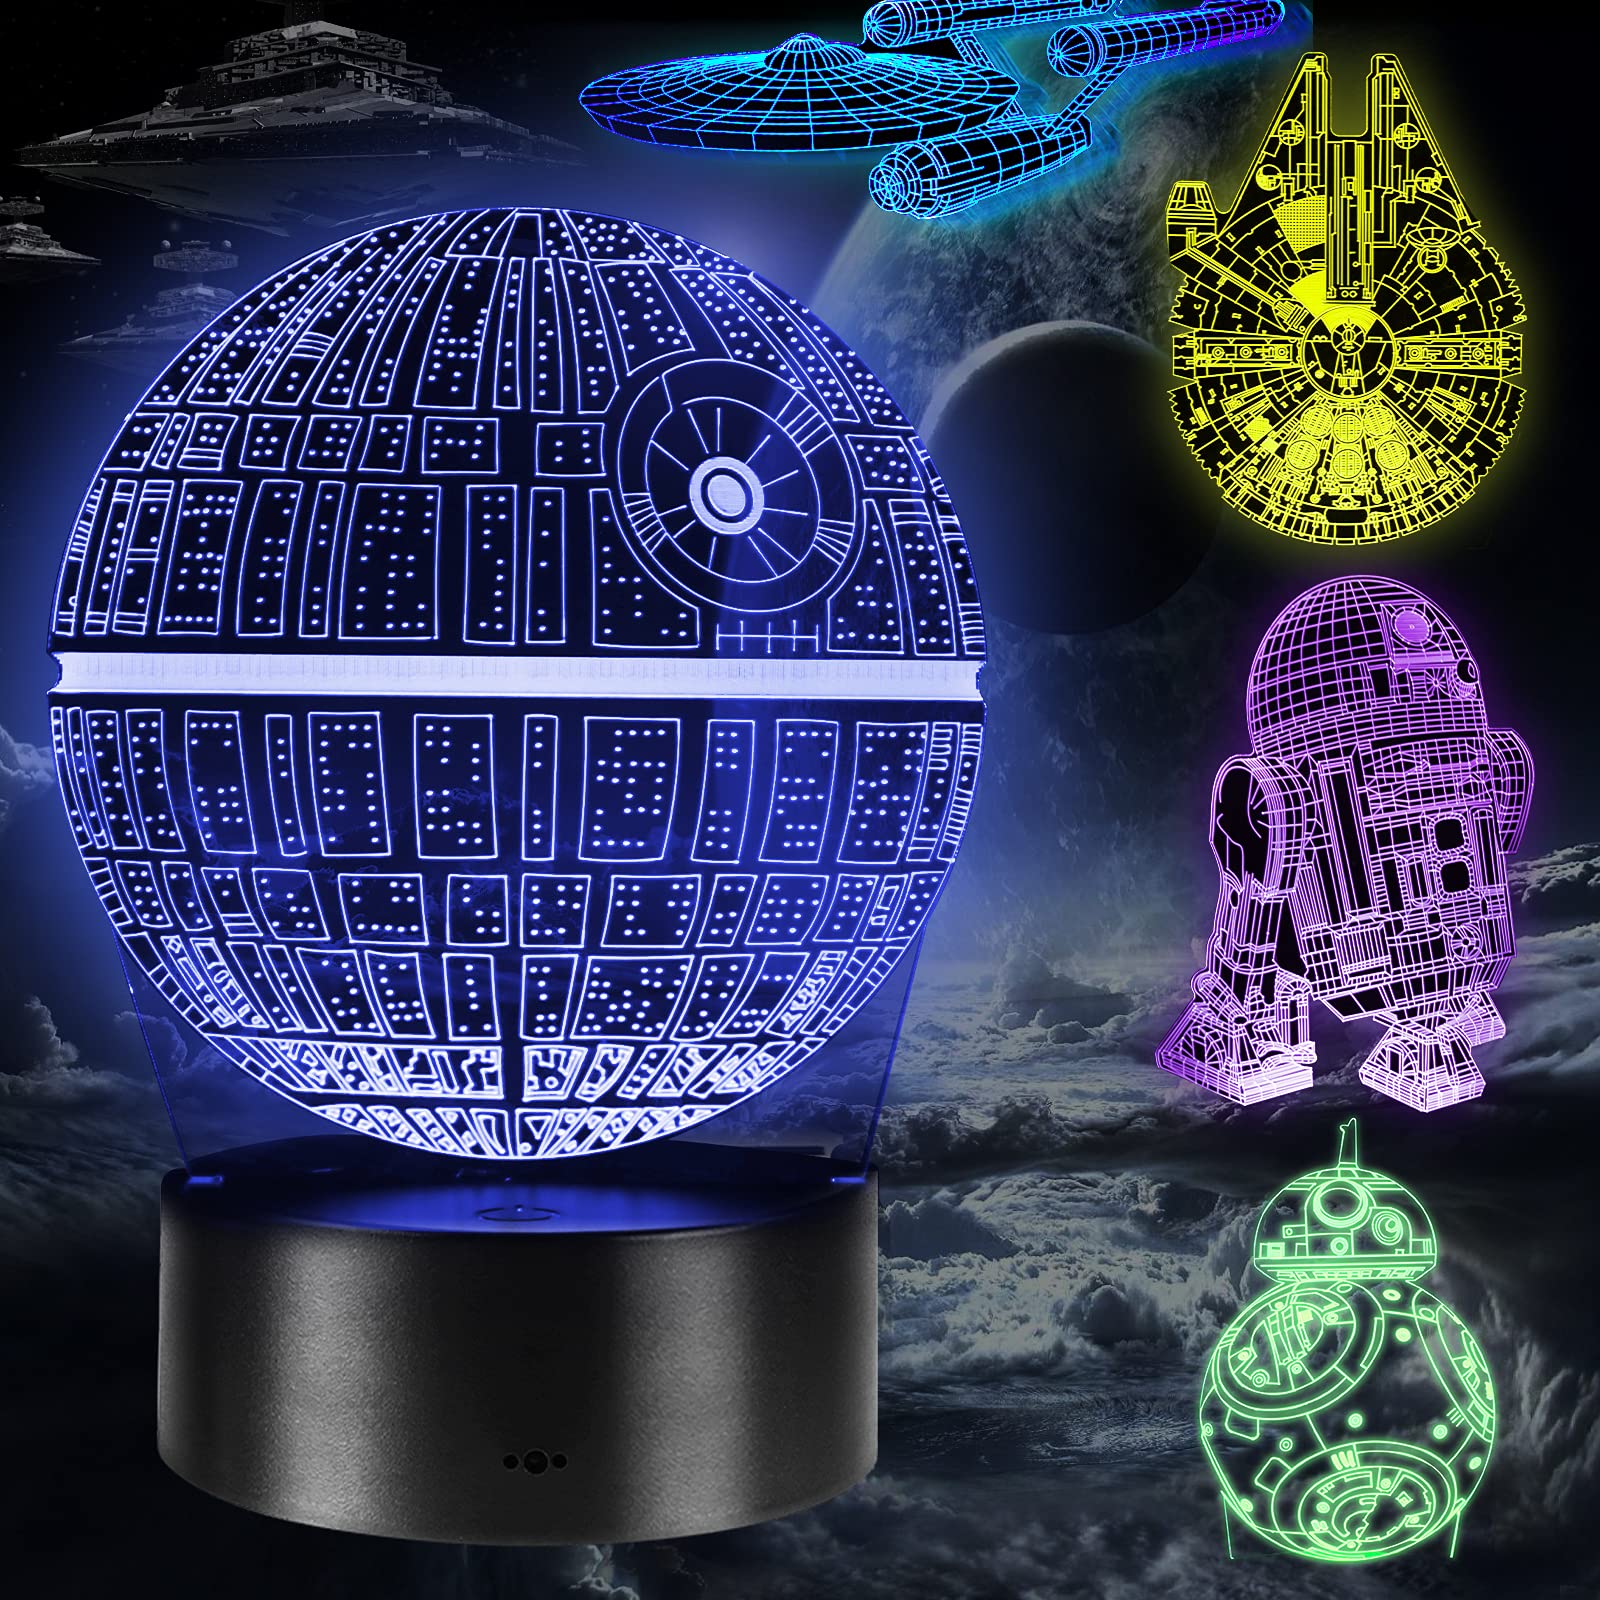 3D Lamp Gifts, 5 Pieces 3D Night Light Toys, 16 Color Changes with Remote Control or Touch, Best Gift for Kids/Boys/Men/Fans